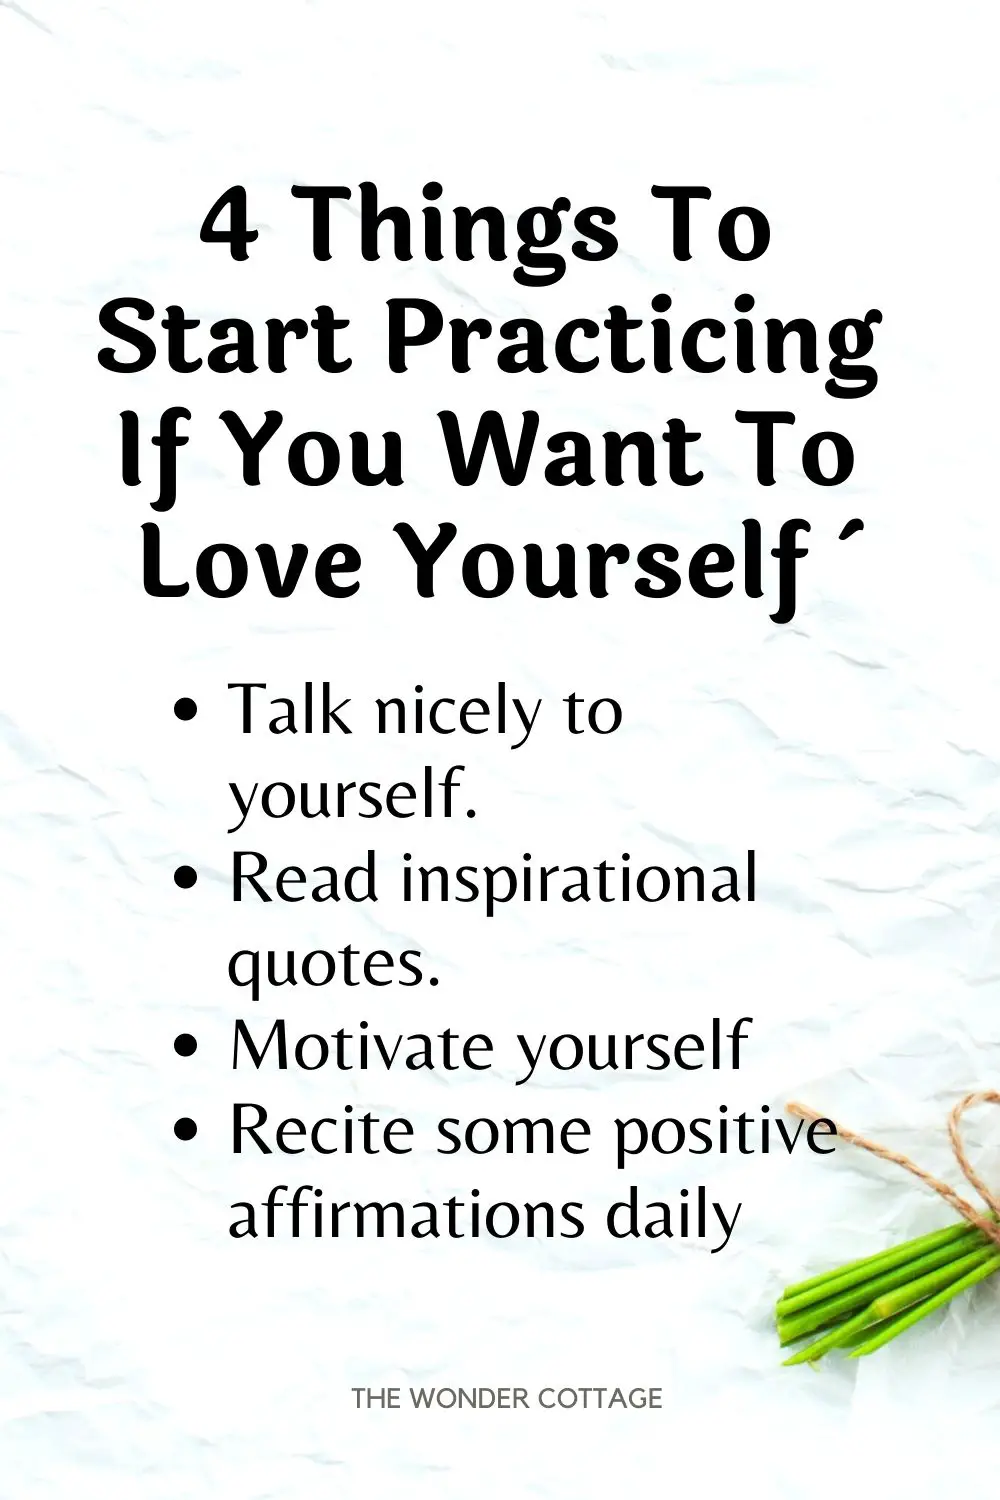 4 things to start practicing if you want to love yourself